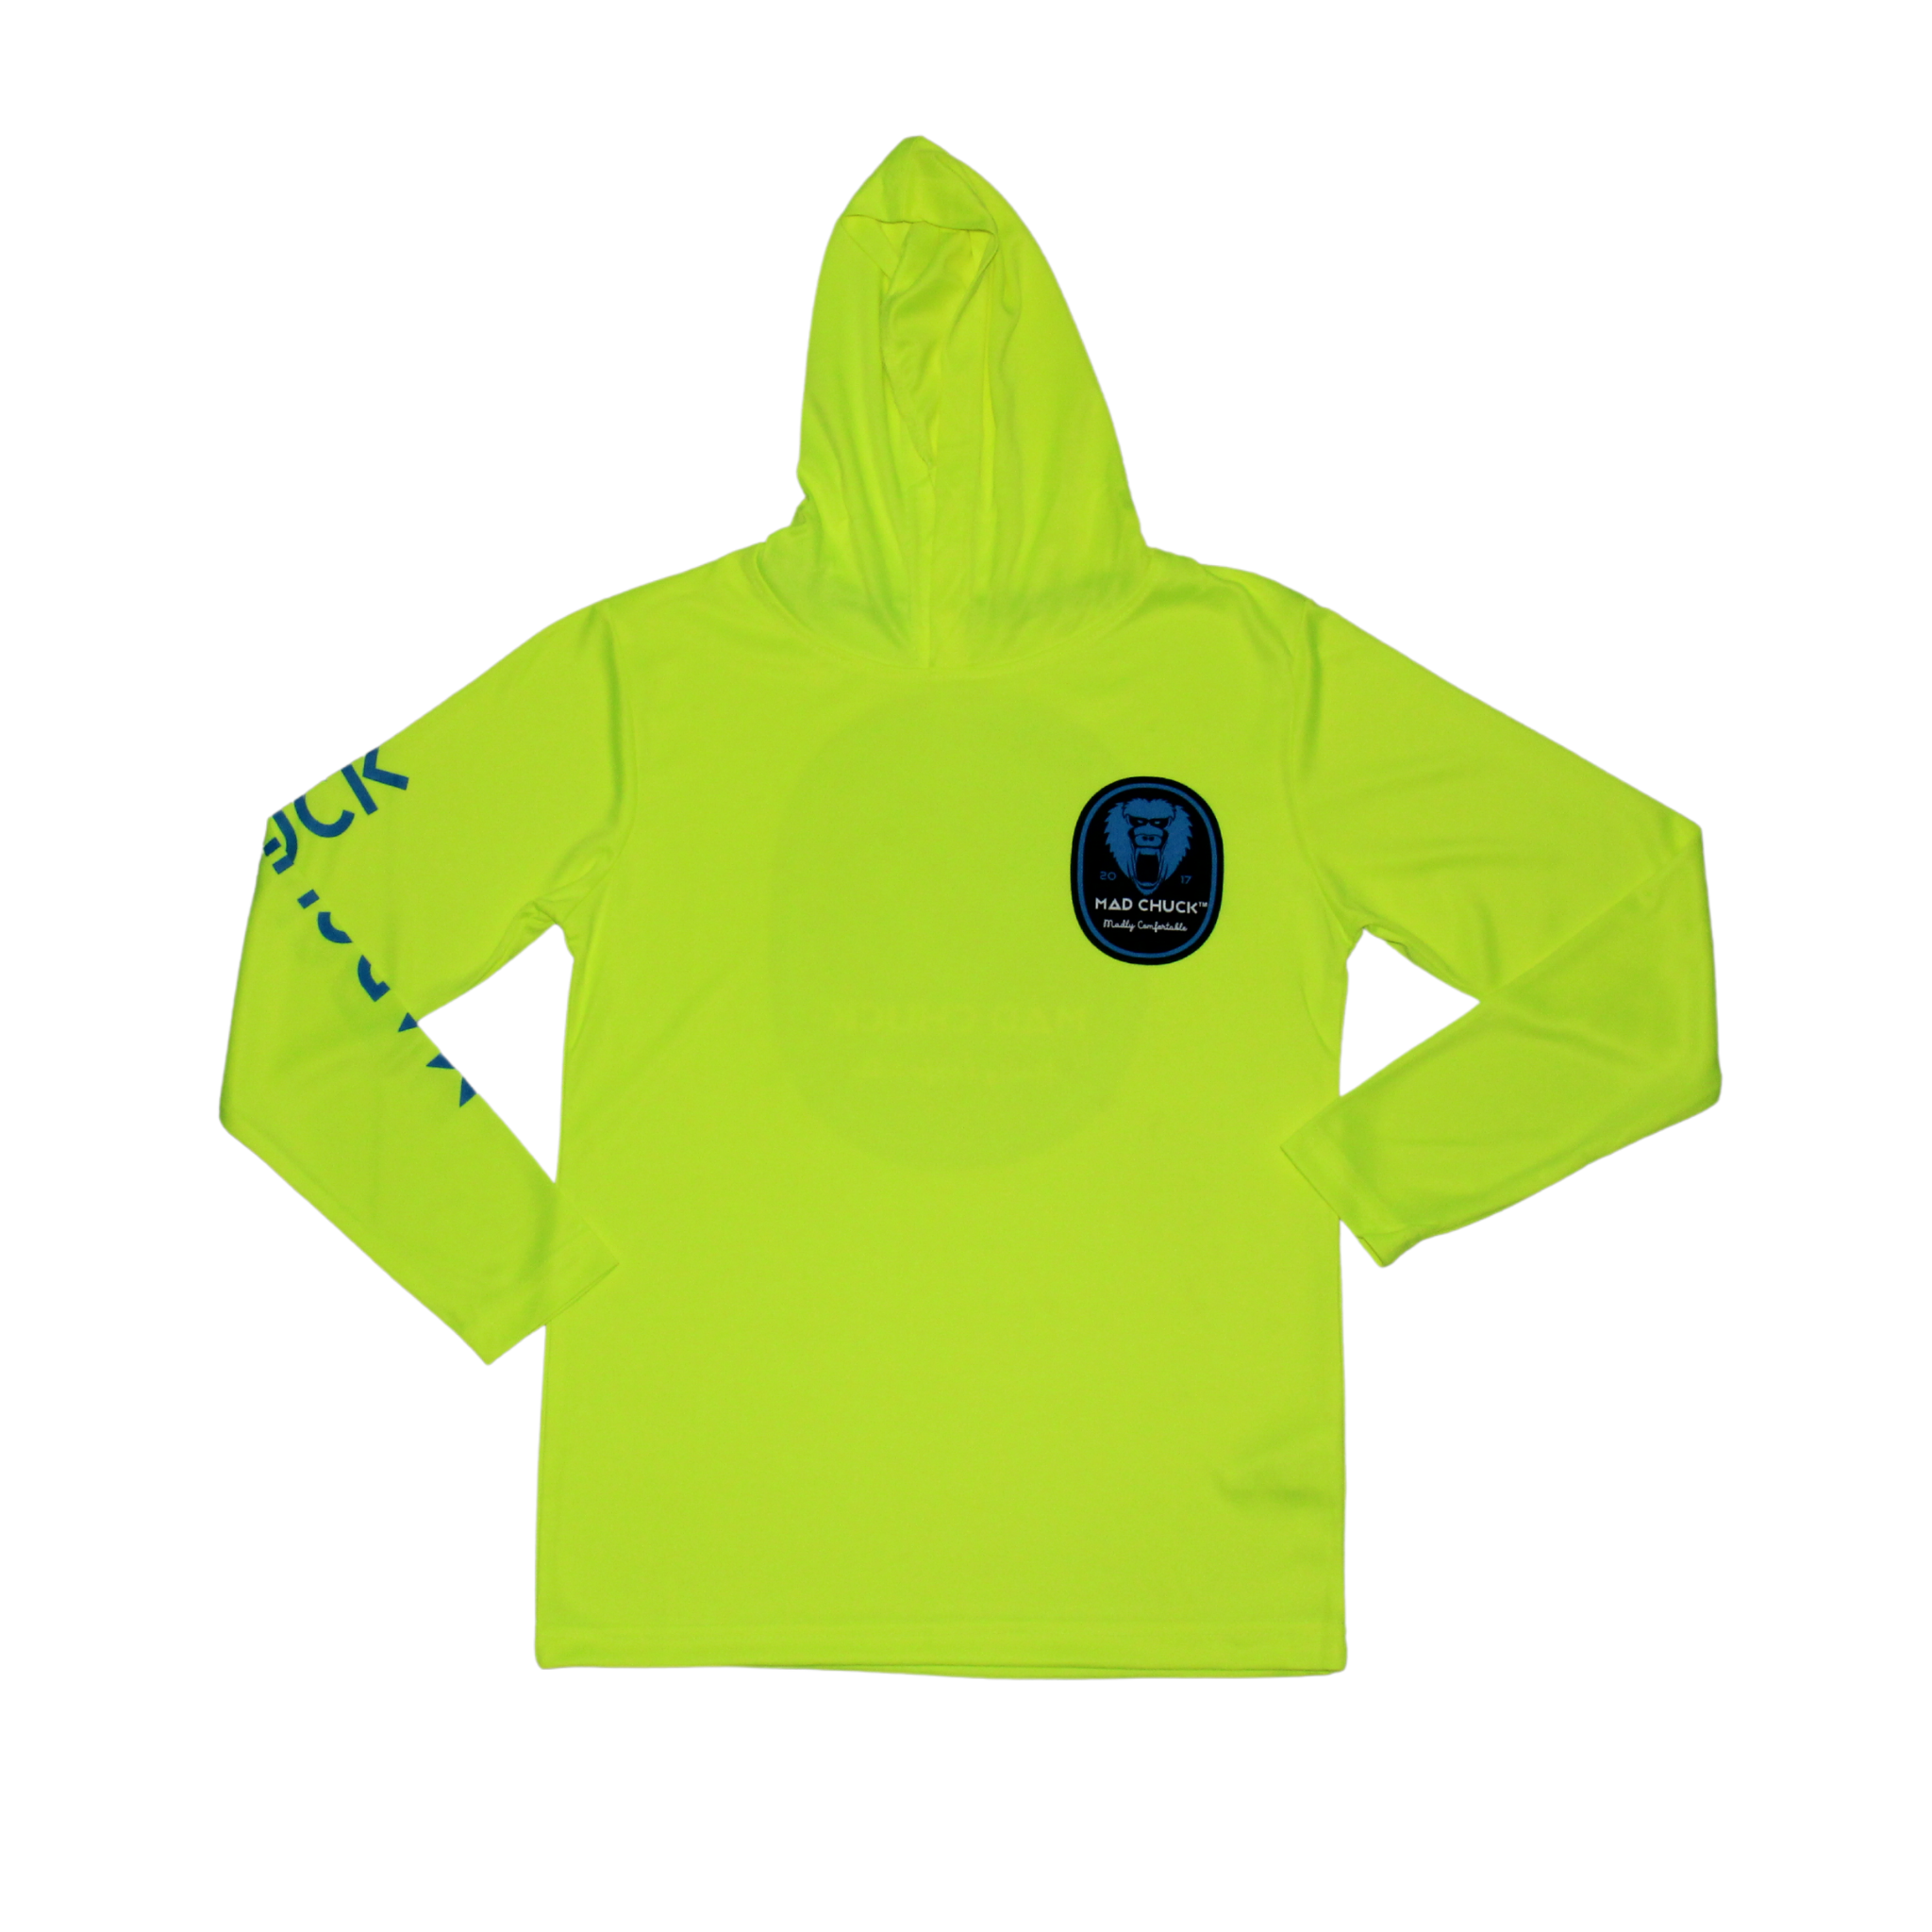 Youth Hooded Madguard Citron SPF 50 - Mad Chuck™